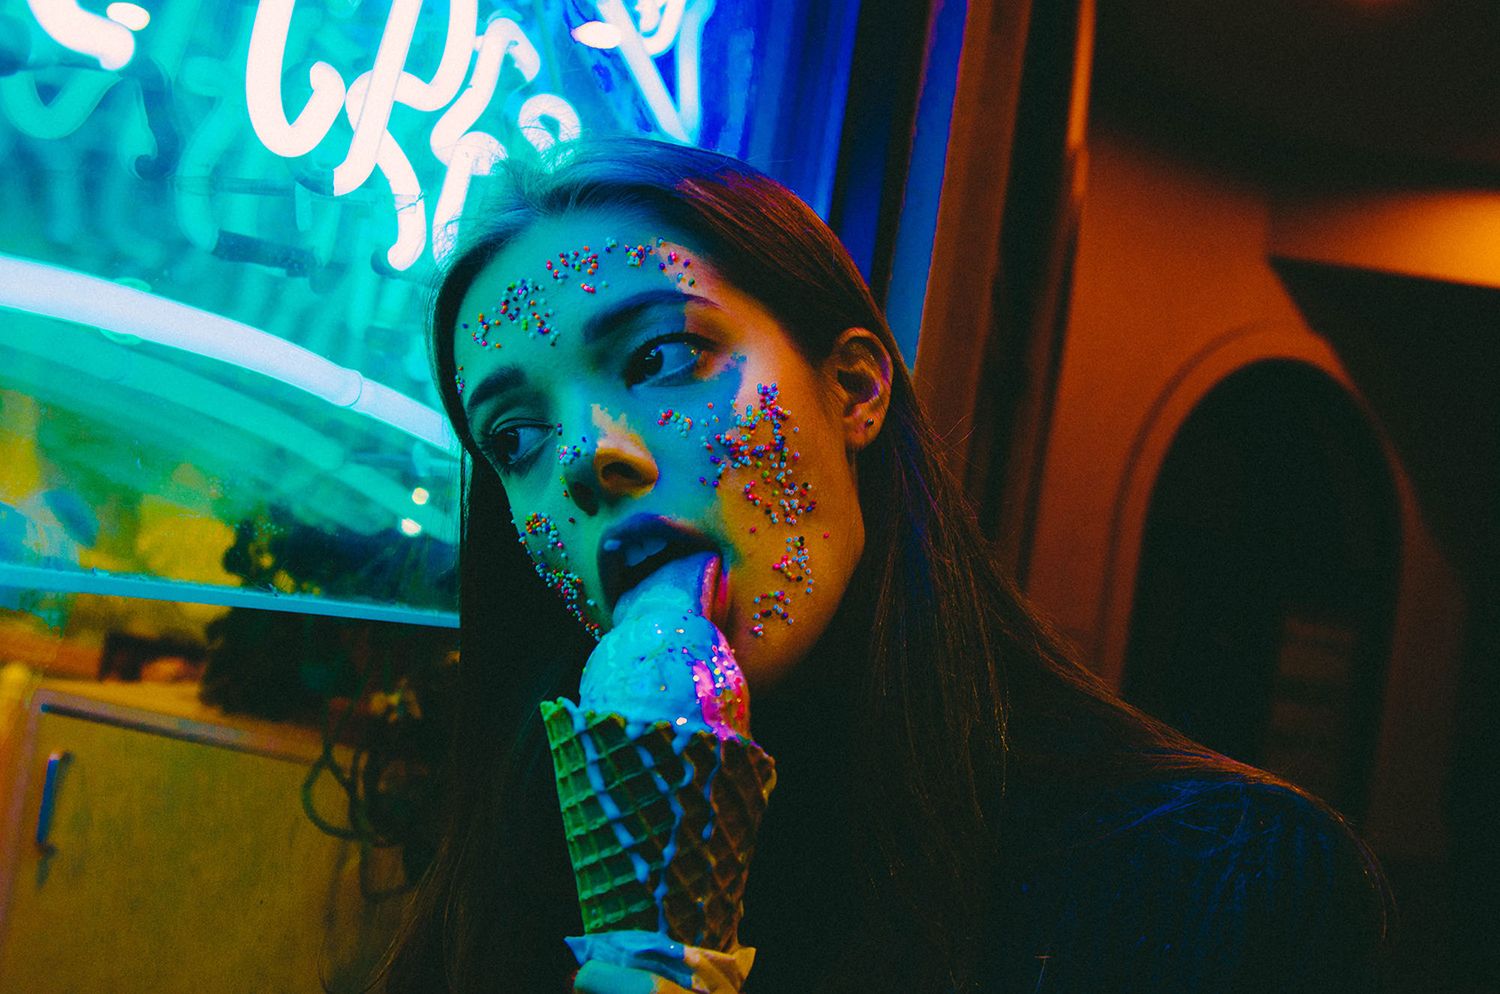 Woman licking ice cream, consumption, photography by Michael Brewington